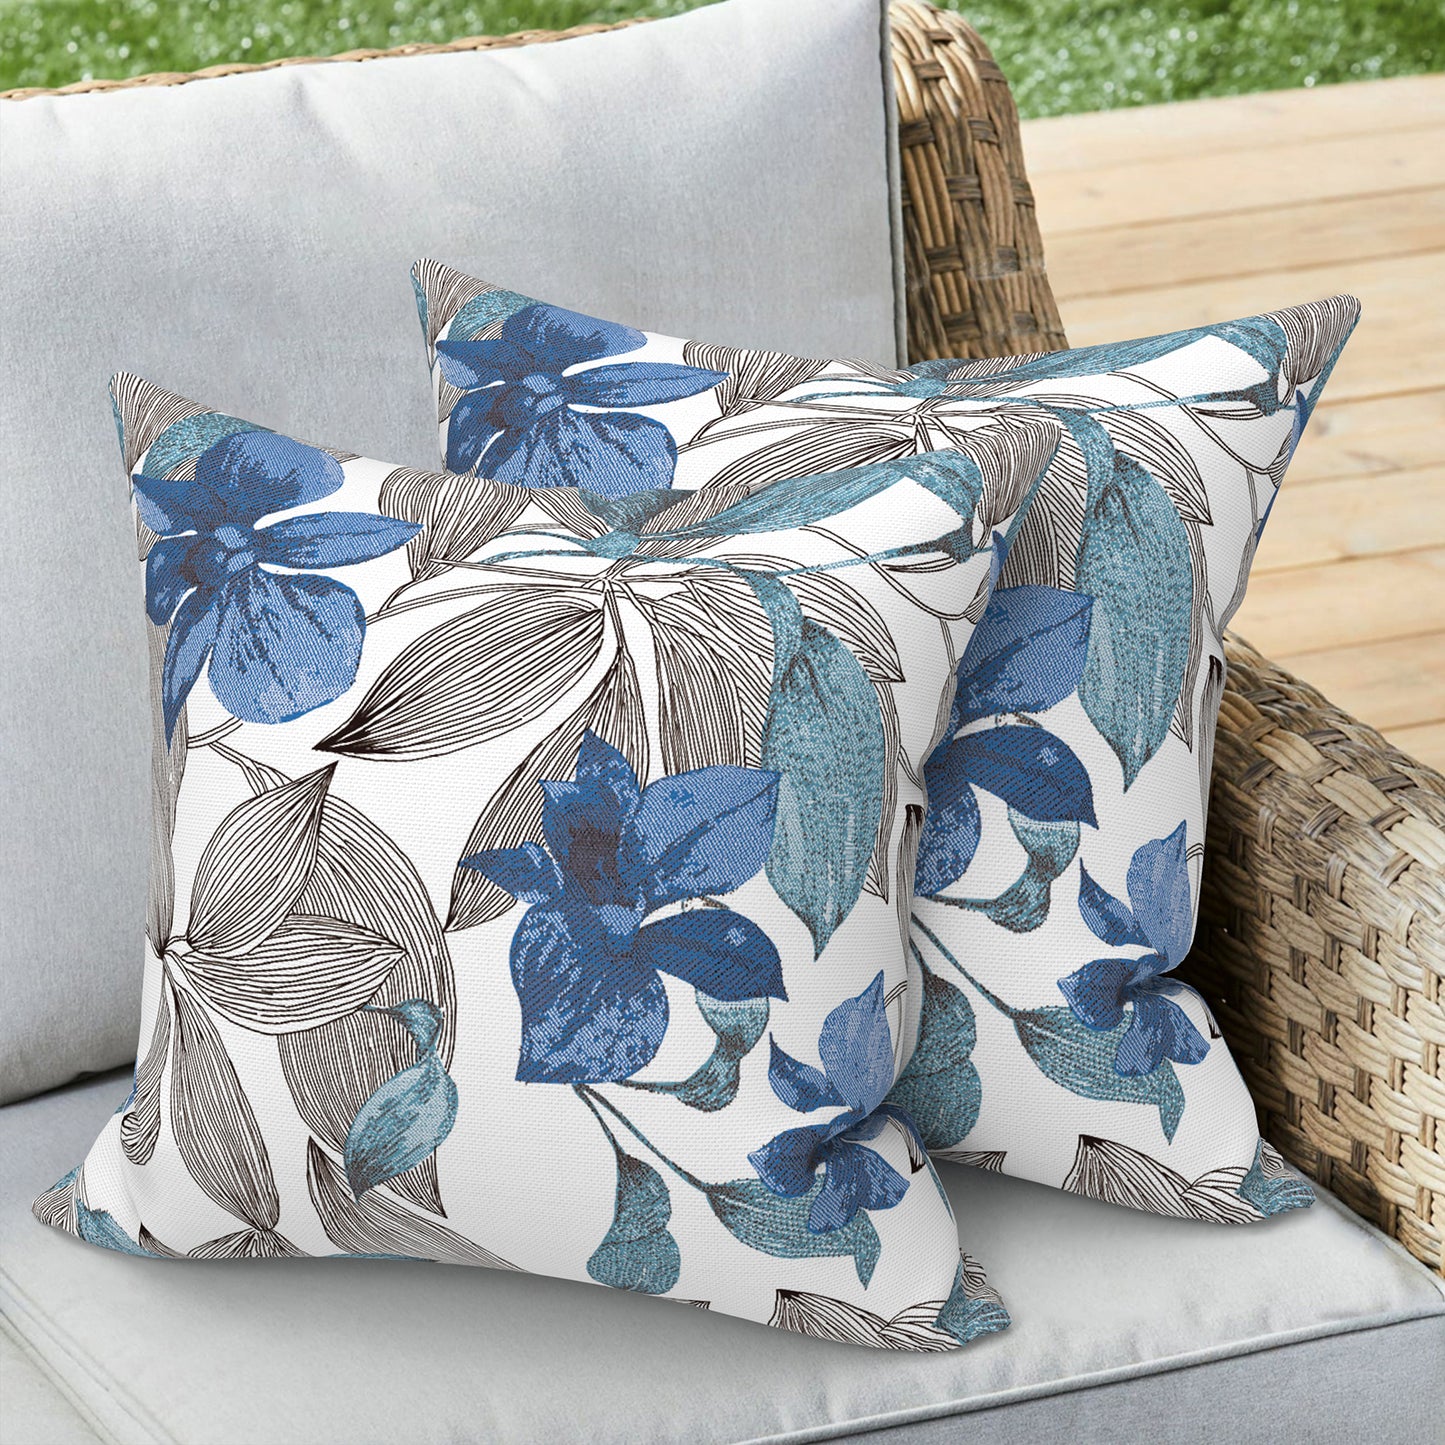 Melody Elephant Outdoor/Indoor Throw Pillow Covers Set of 2, All Weather Square Pillow Cases 16x16 Inch, Patio Cushion Pillow of Home Furniture Use, Clemens Blue